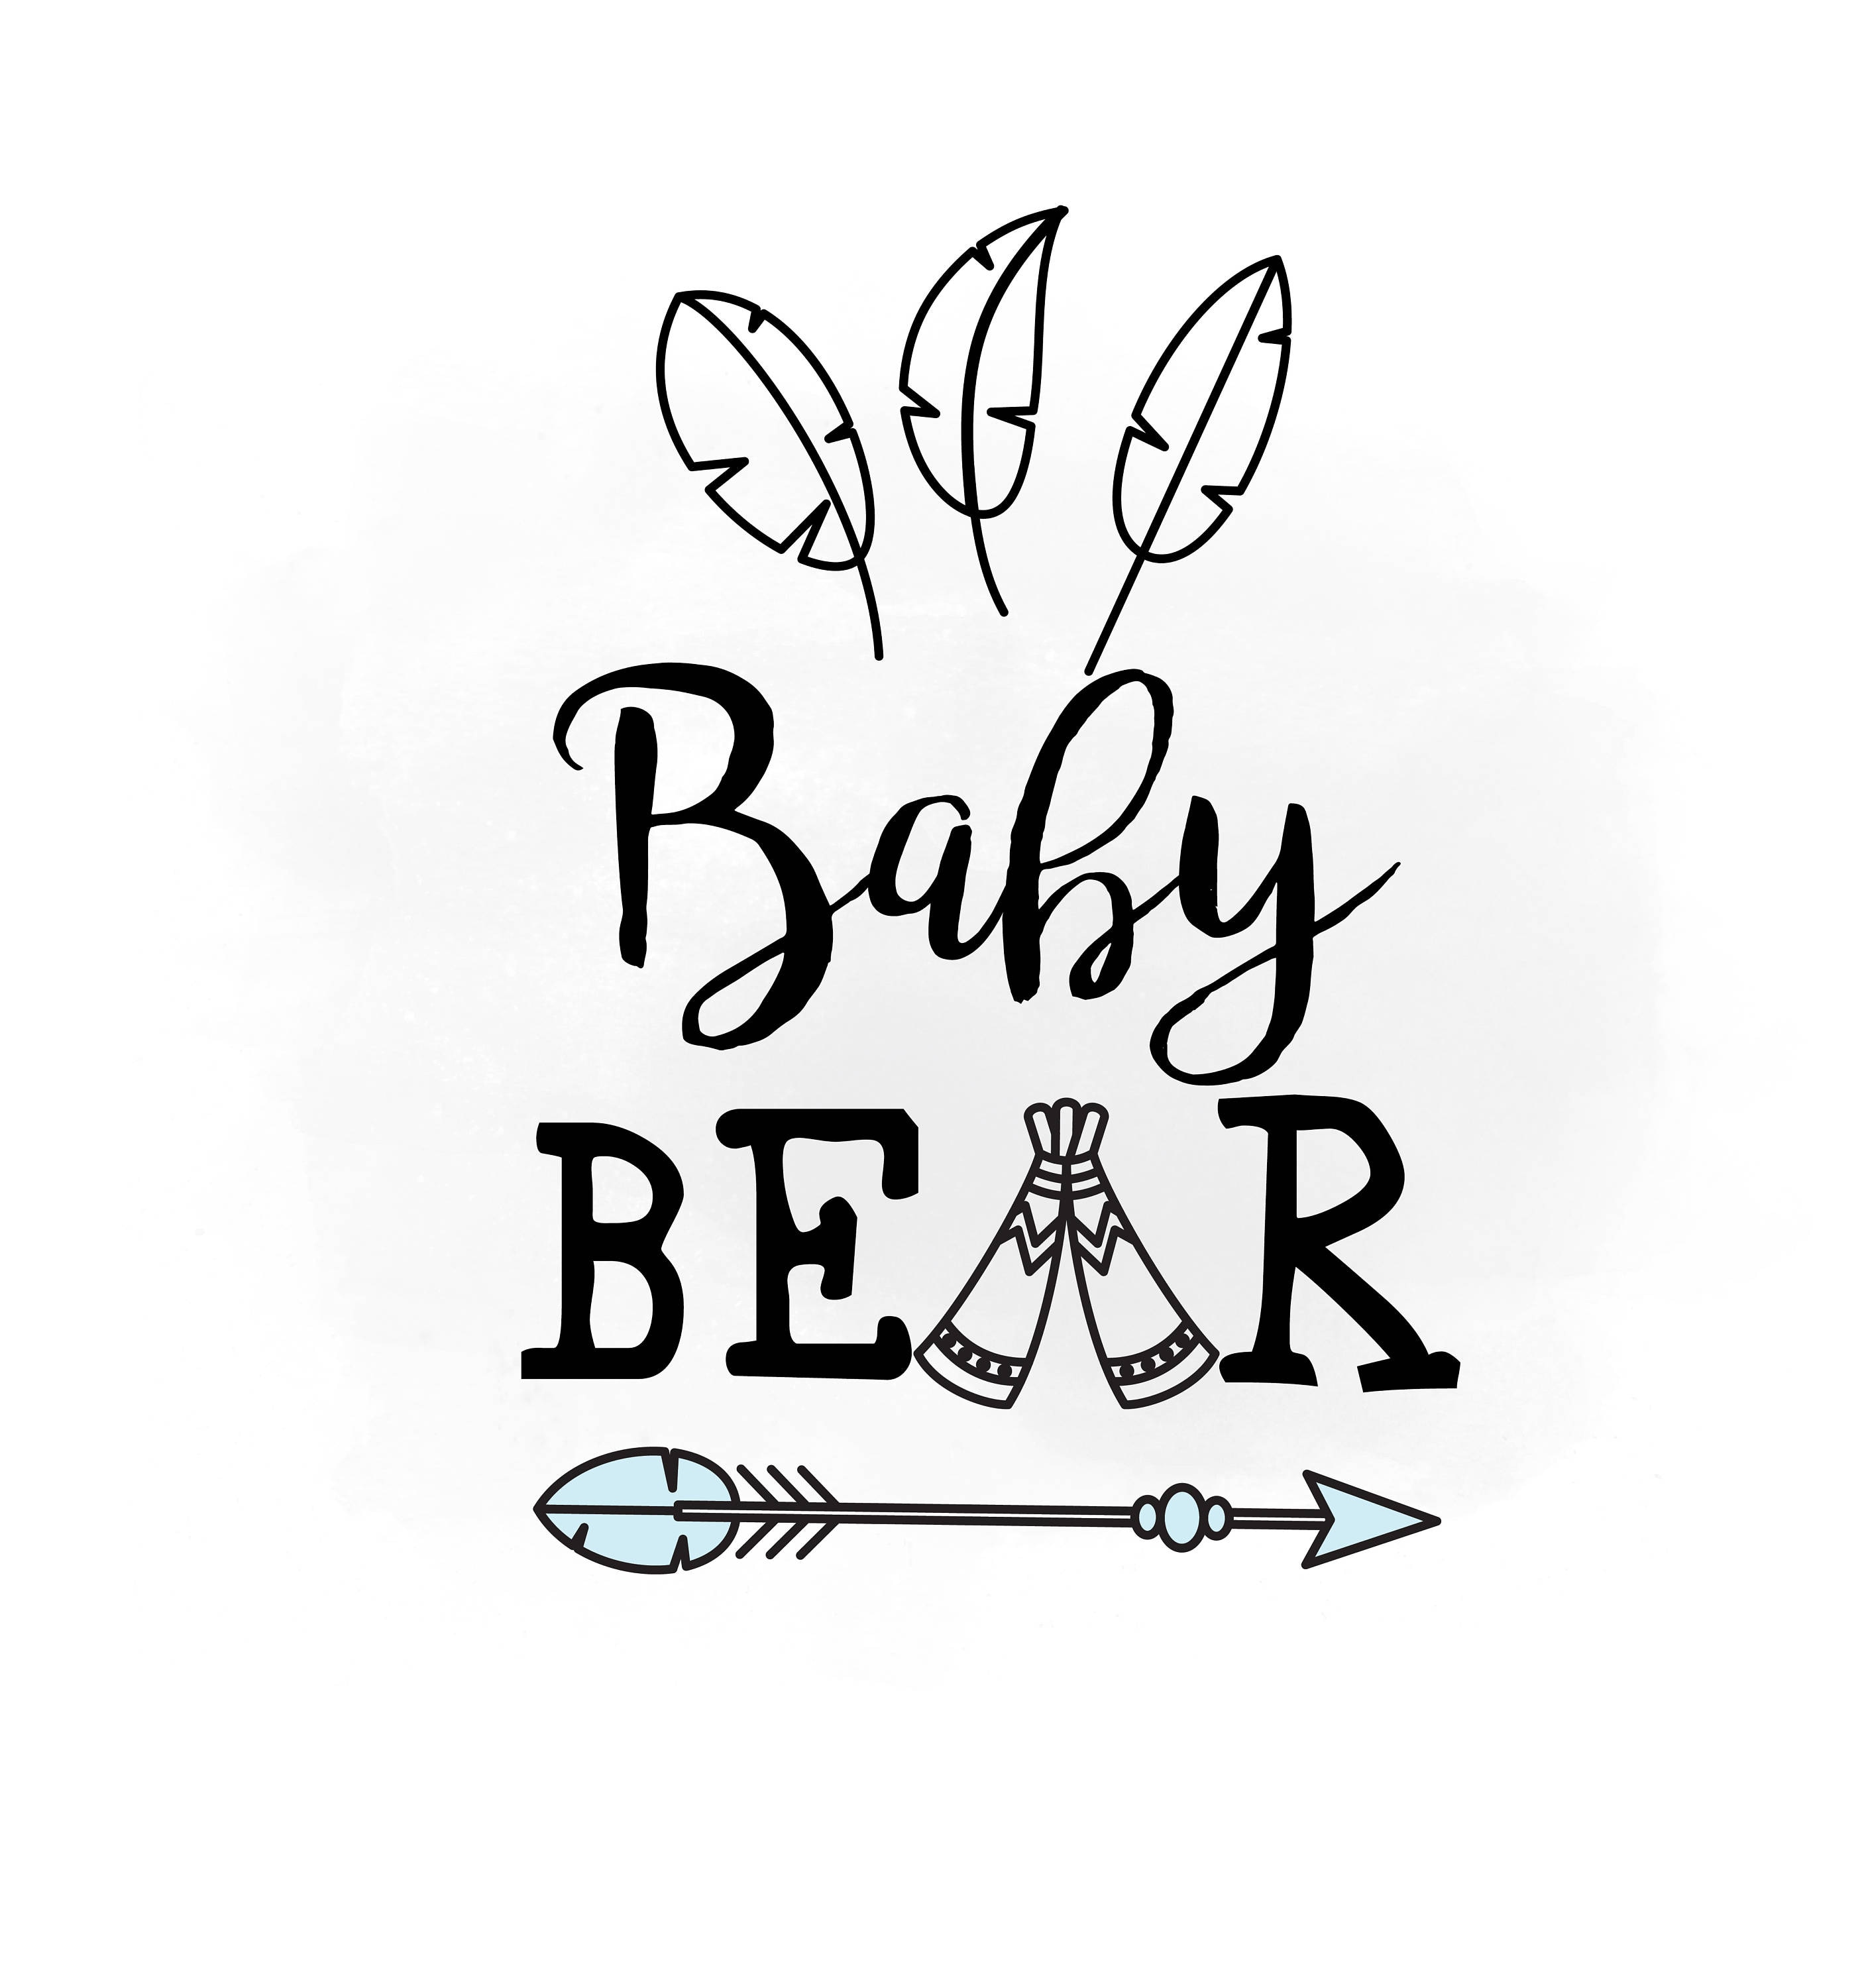 Download Baby Bear svg clipart Baby bear clipart digital file Baby